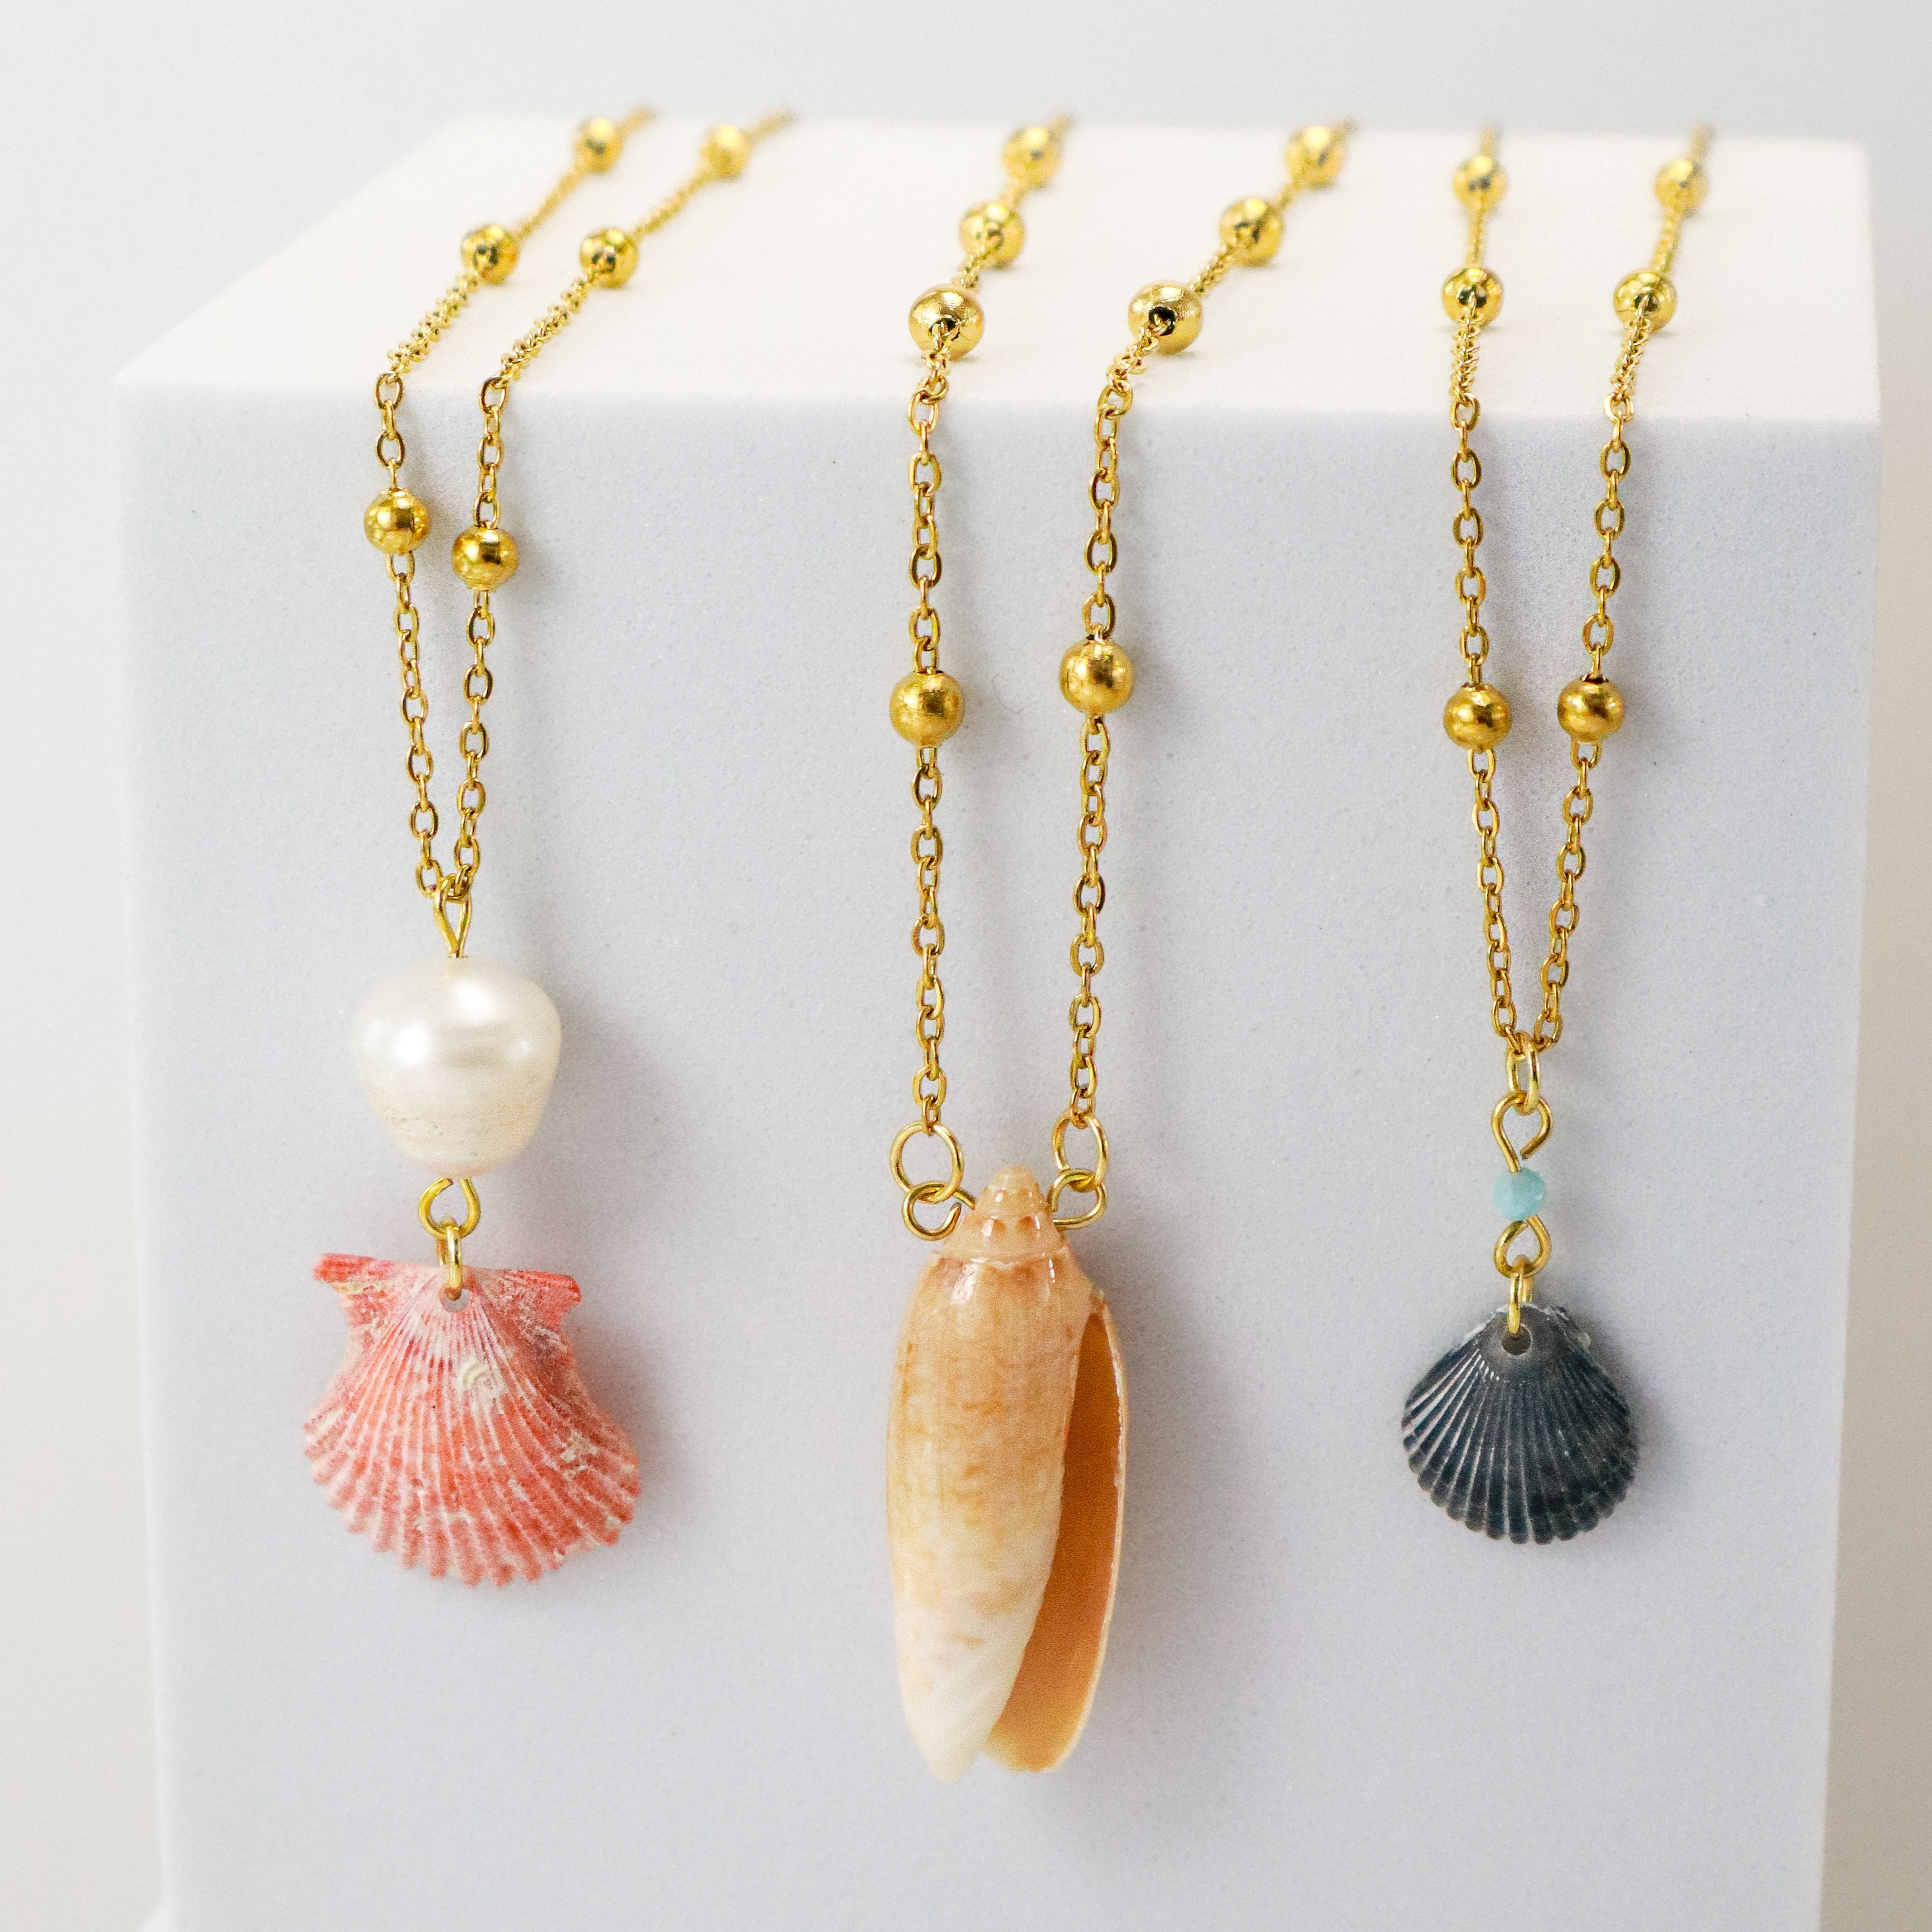 Indie’s Pink Scallop Shell & Pearl Necklace